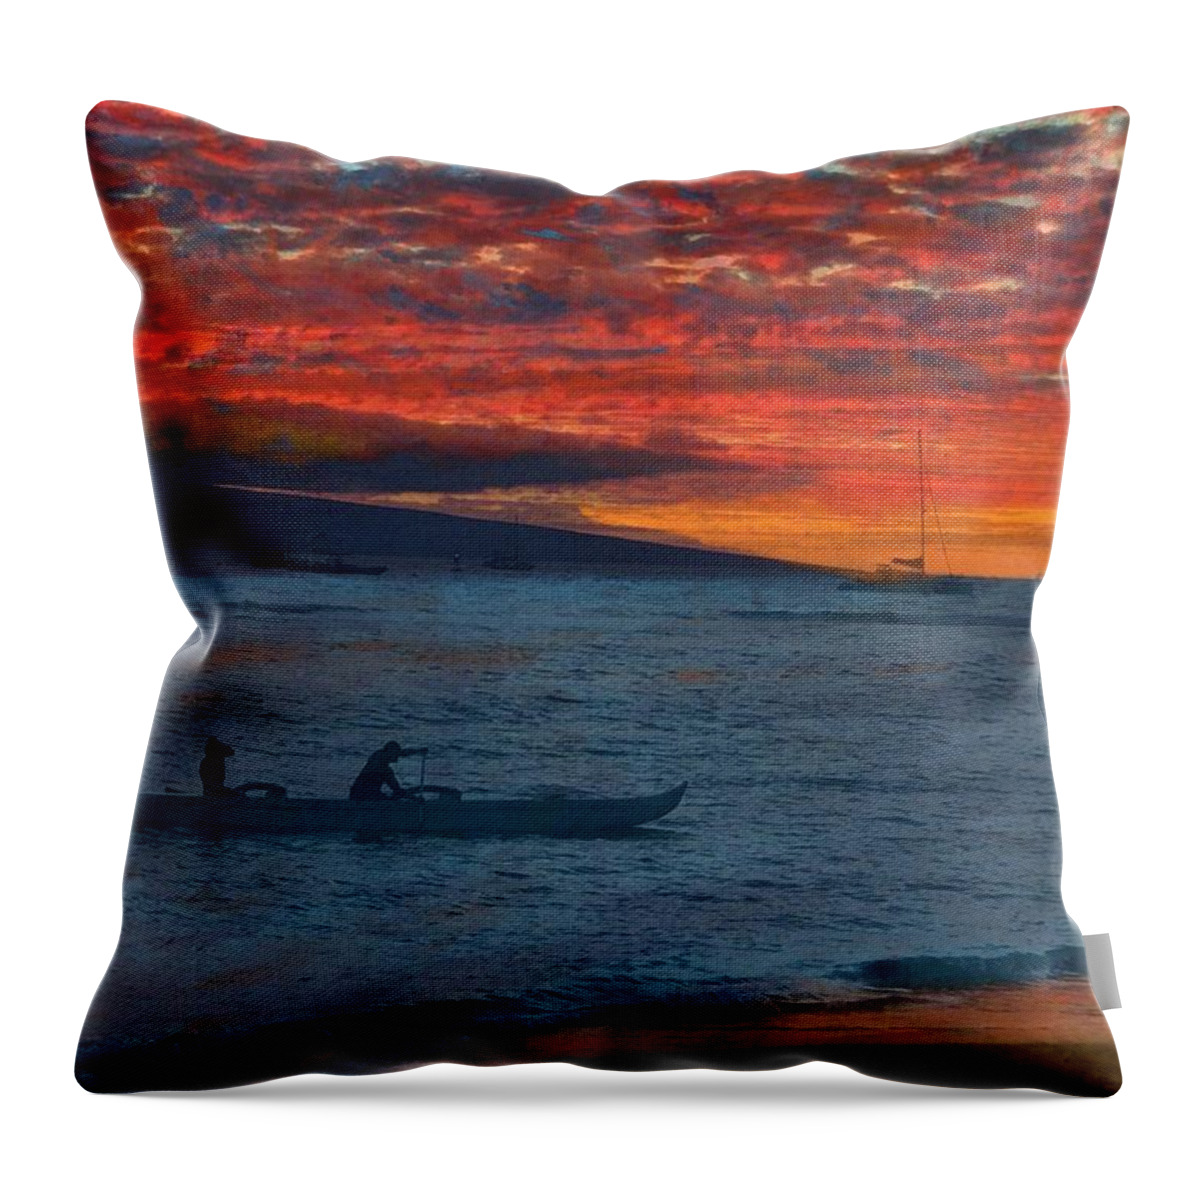 Maui Throw Pillow featuring the painting Maui Sunset by Bill King